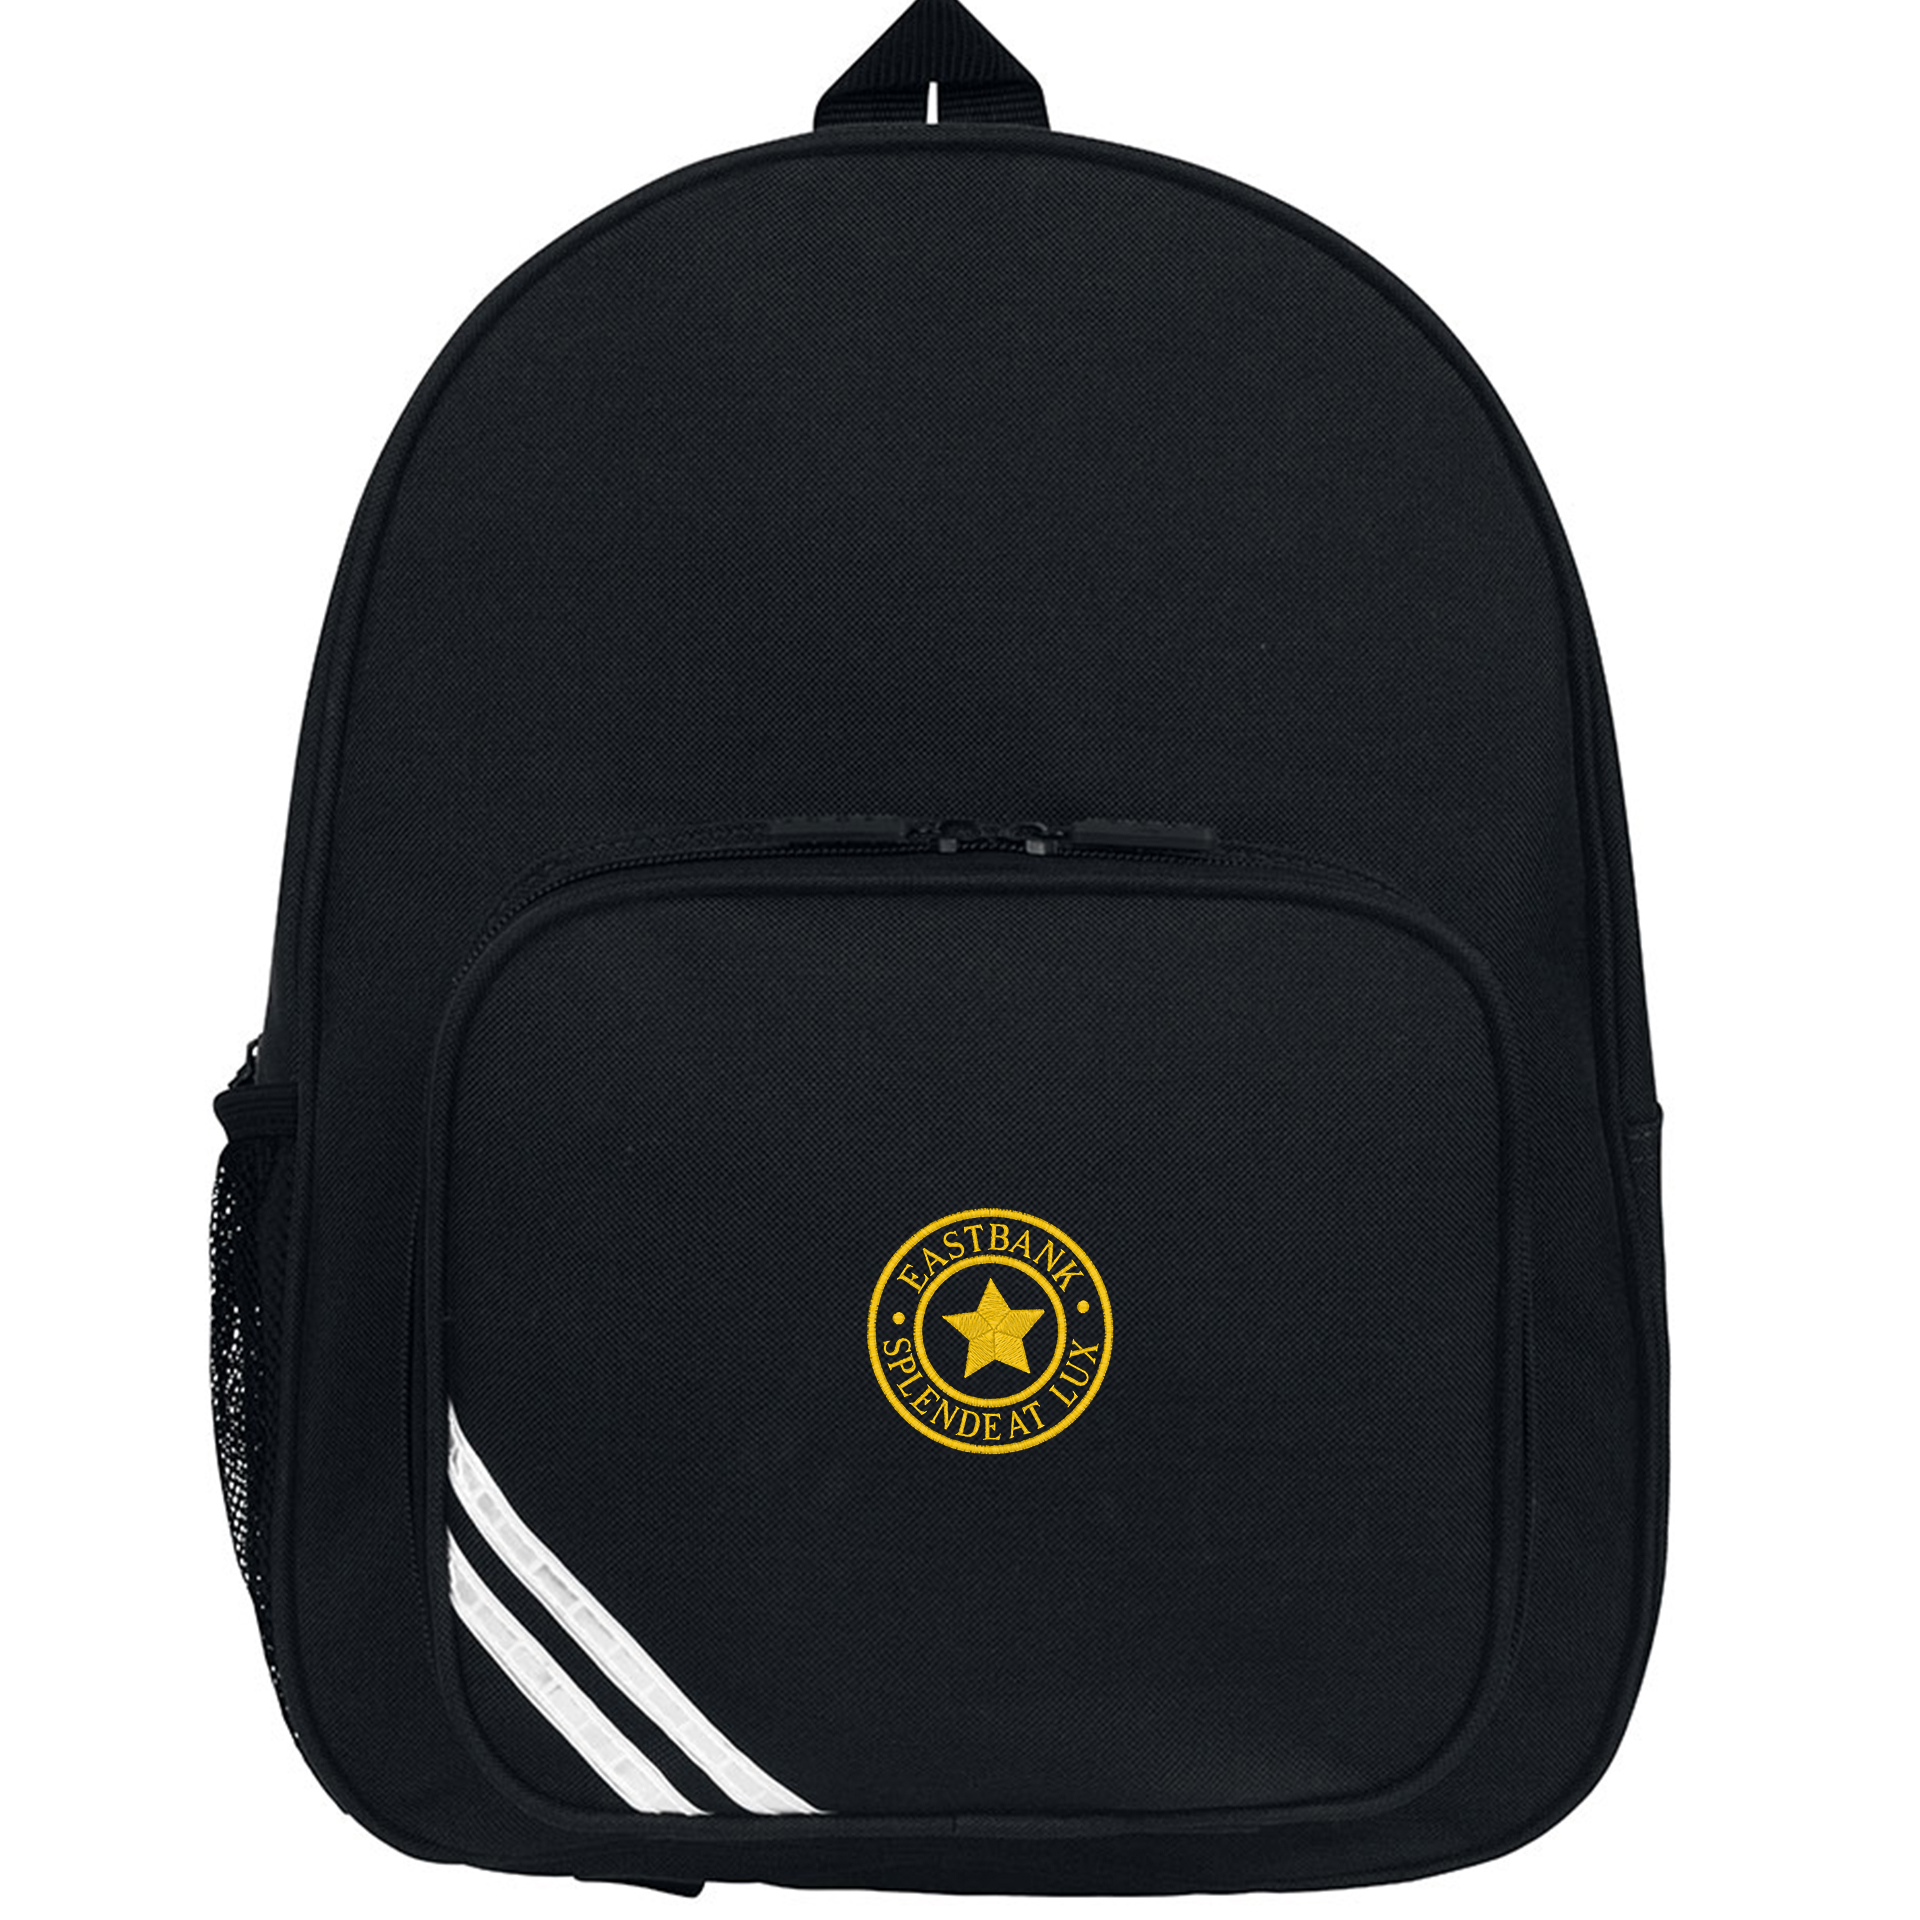 Eastbank Primary Infant Backpack